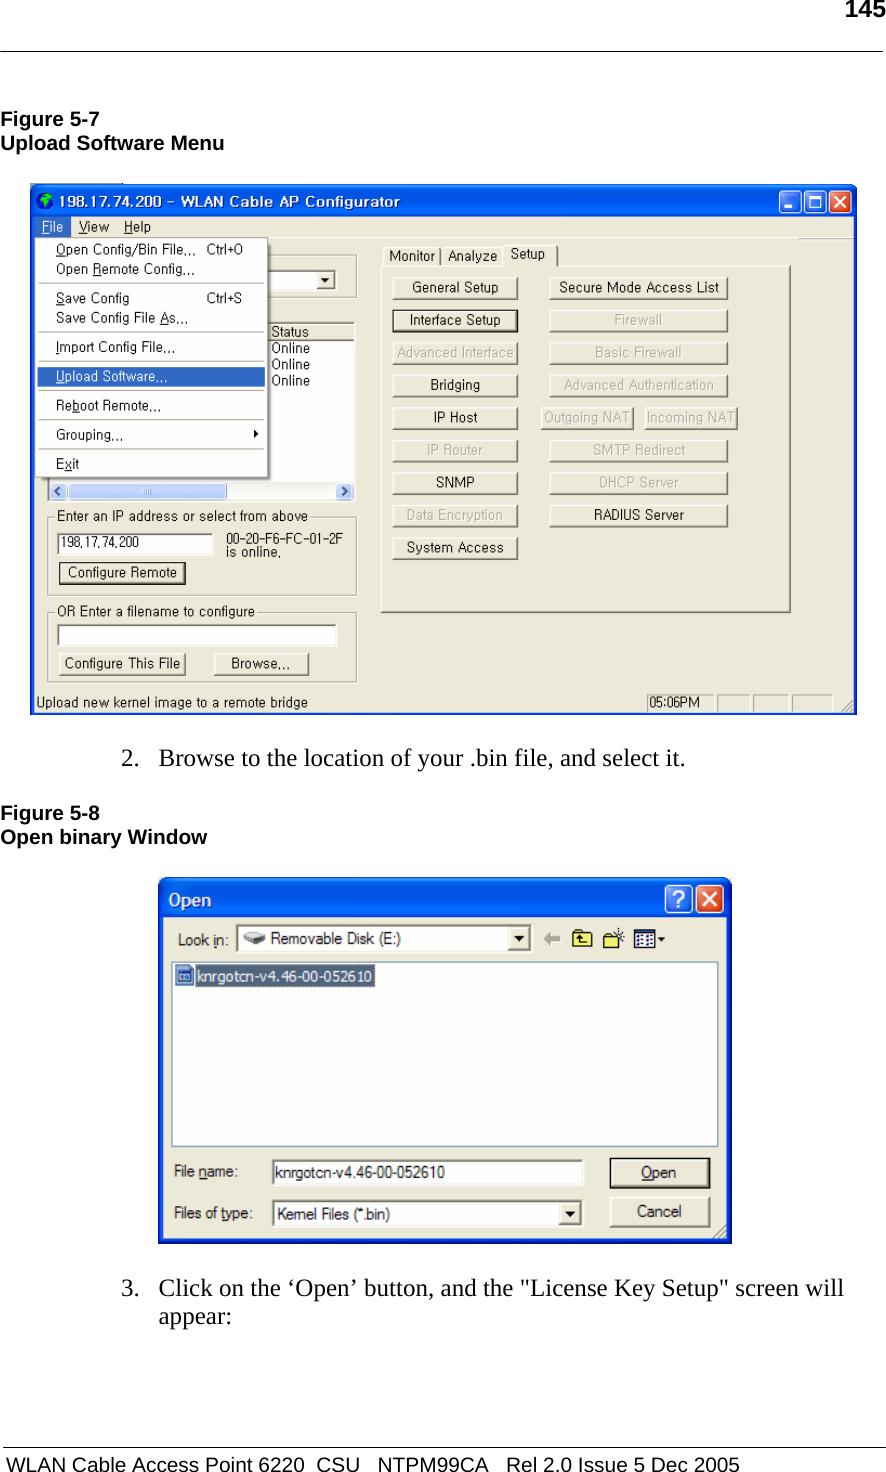   145   WLAN Cable Access Point 6220  CSU   NTPM99CA   Rel 2.0 Issue 5 Dec 2005 Figure 5-7 Upload Software Menu    2. Browse to the location of your .bin file, and select it.  Figure 5-8 Open binary Window   3. Click on the ‘Open’ button, and the &quot;License Key Setup&quot; screen will appear:  